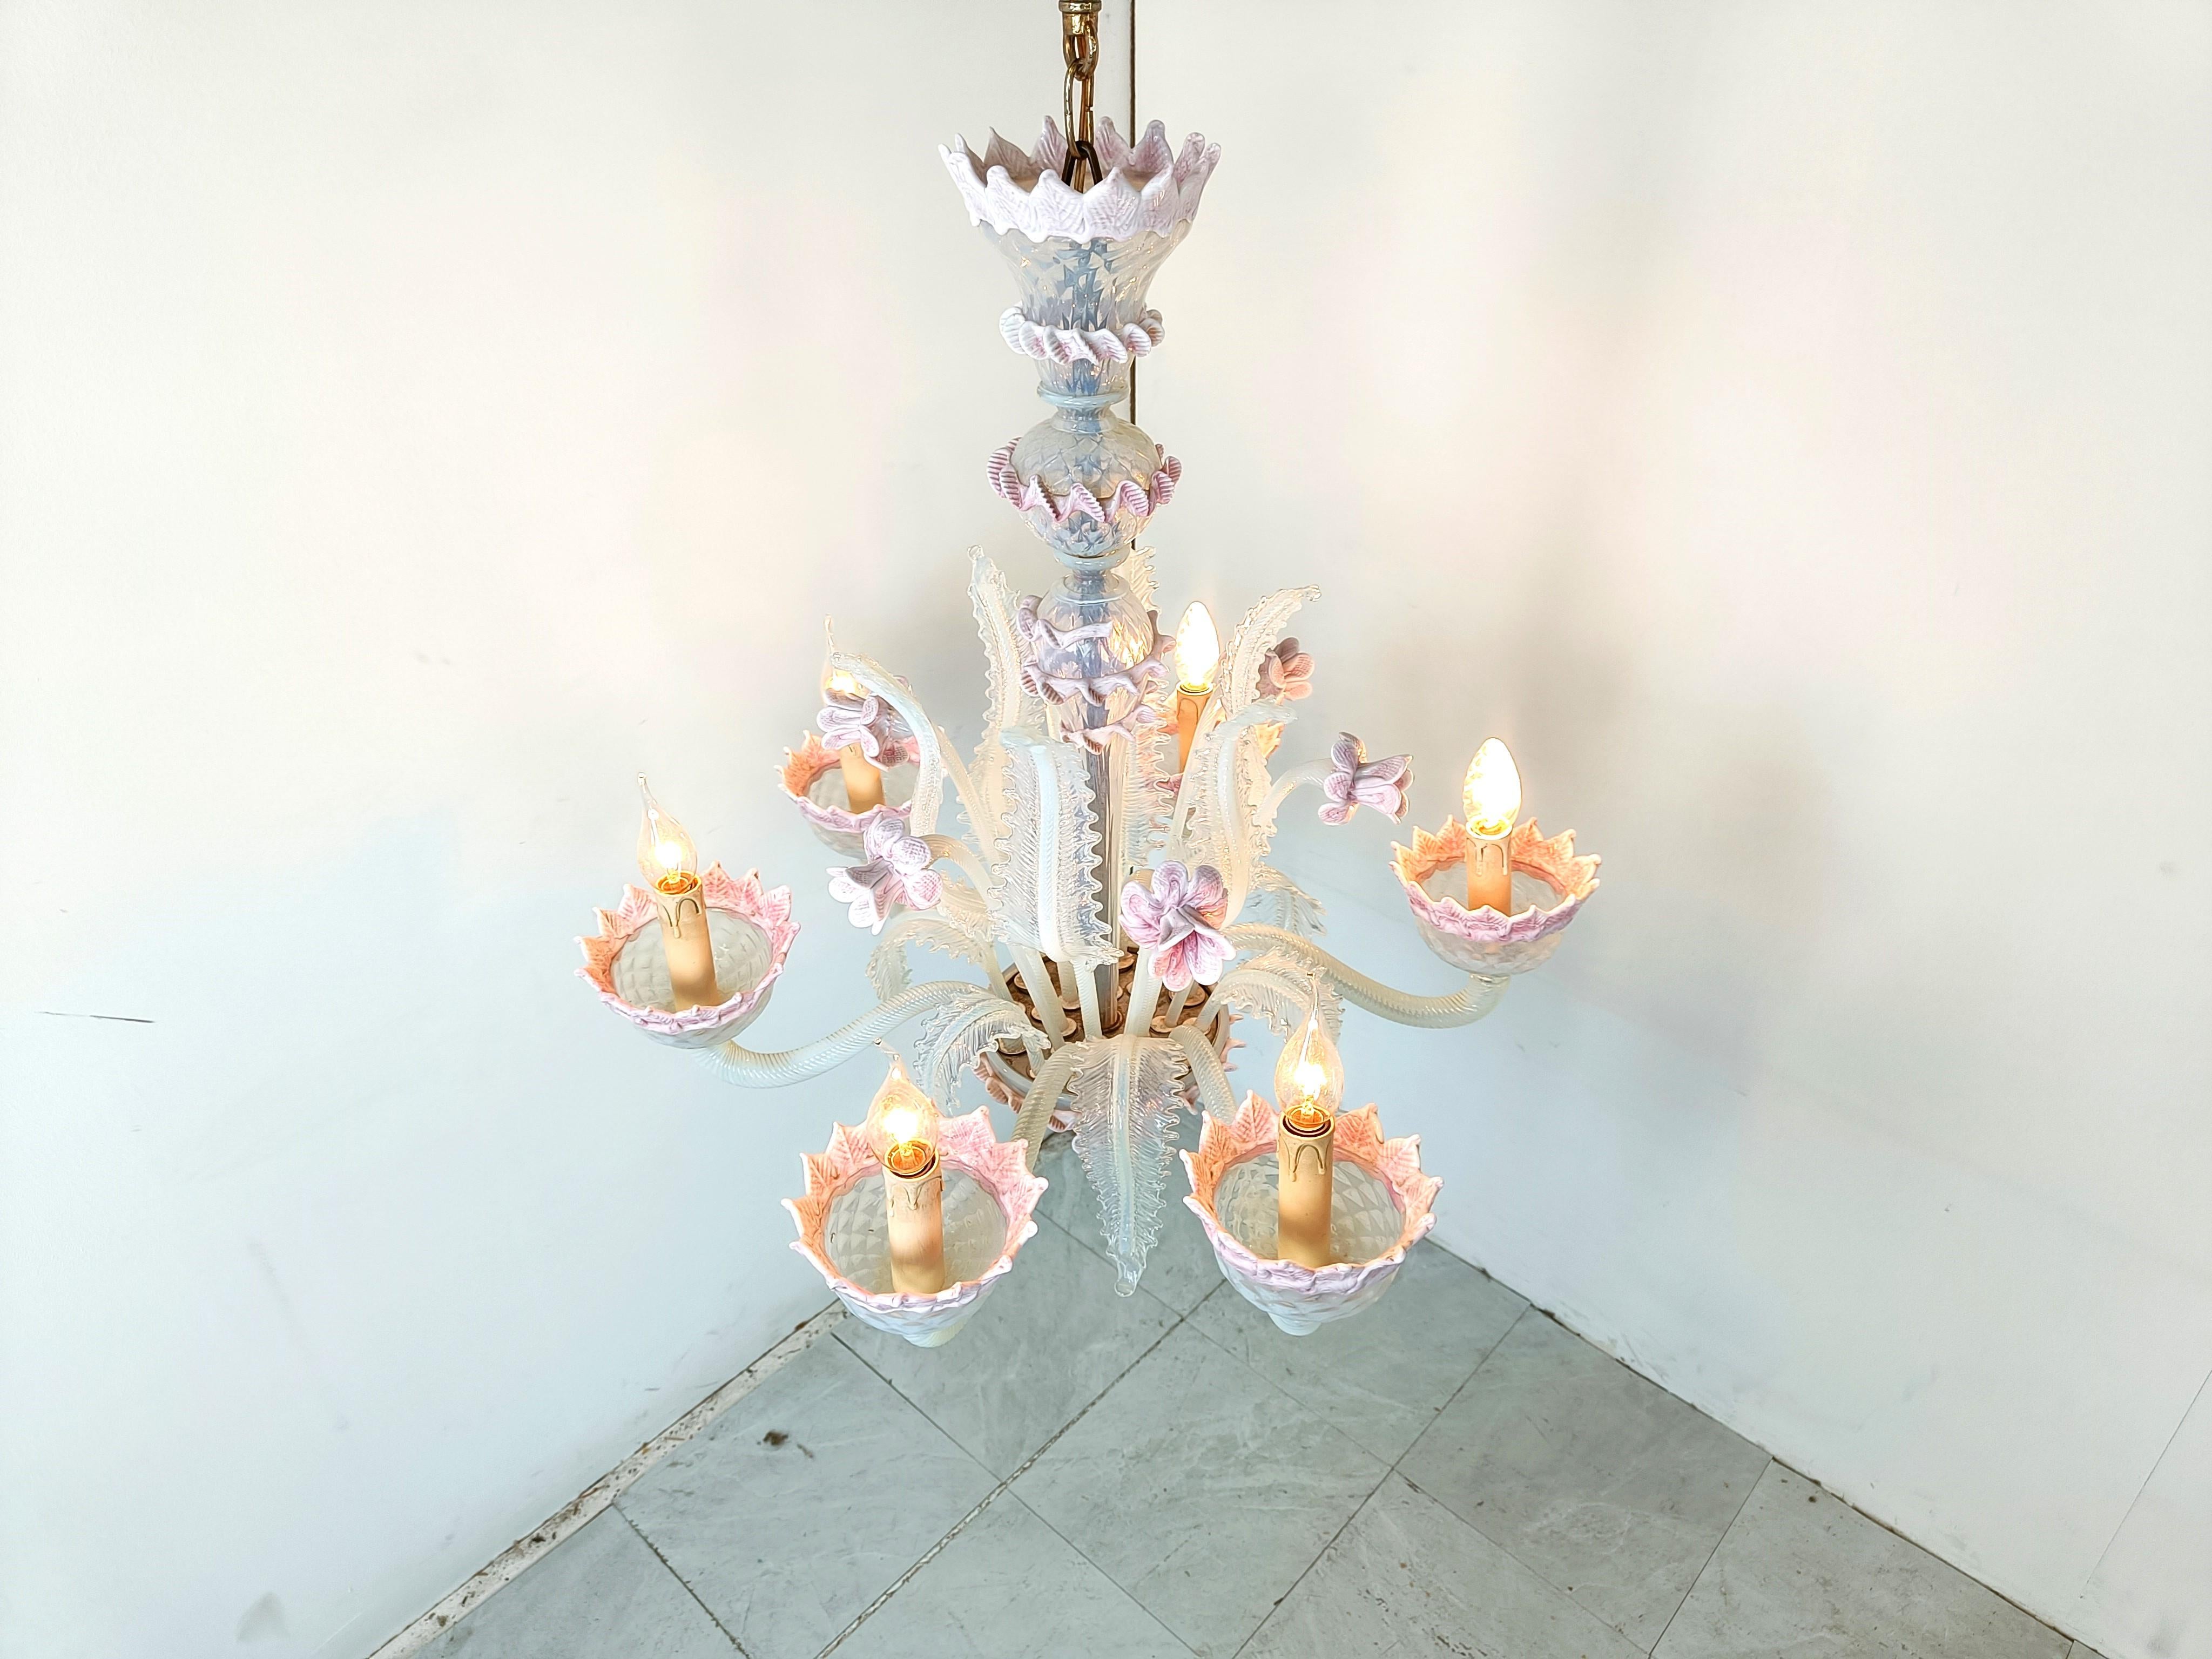 Stunning mid century murano glass chandelier.

It consists of 6 arms with candelabra lights.

The chandelier looks very elegant and has beautiful hand made flower and leafs.

Complete and good condition, tested and working.

1950s - Italy,